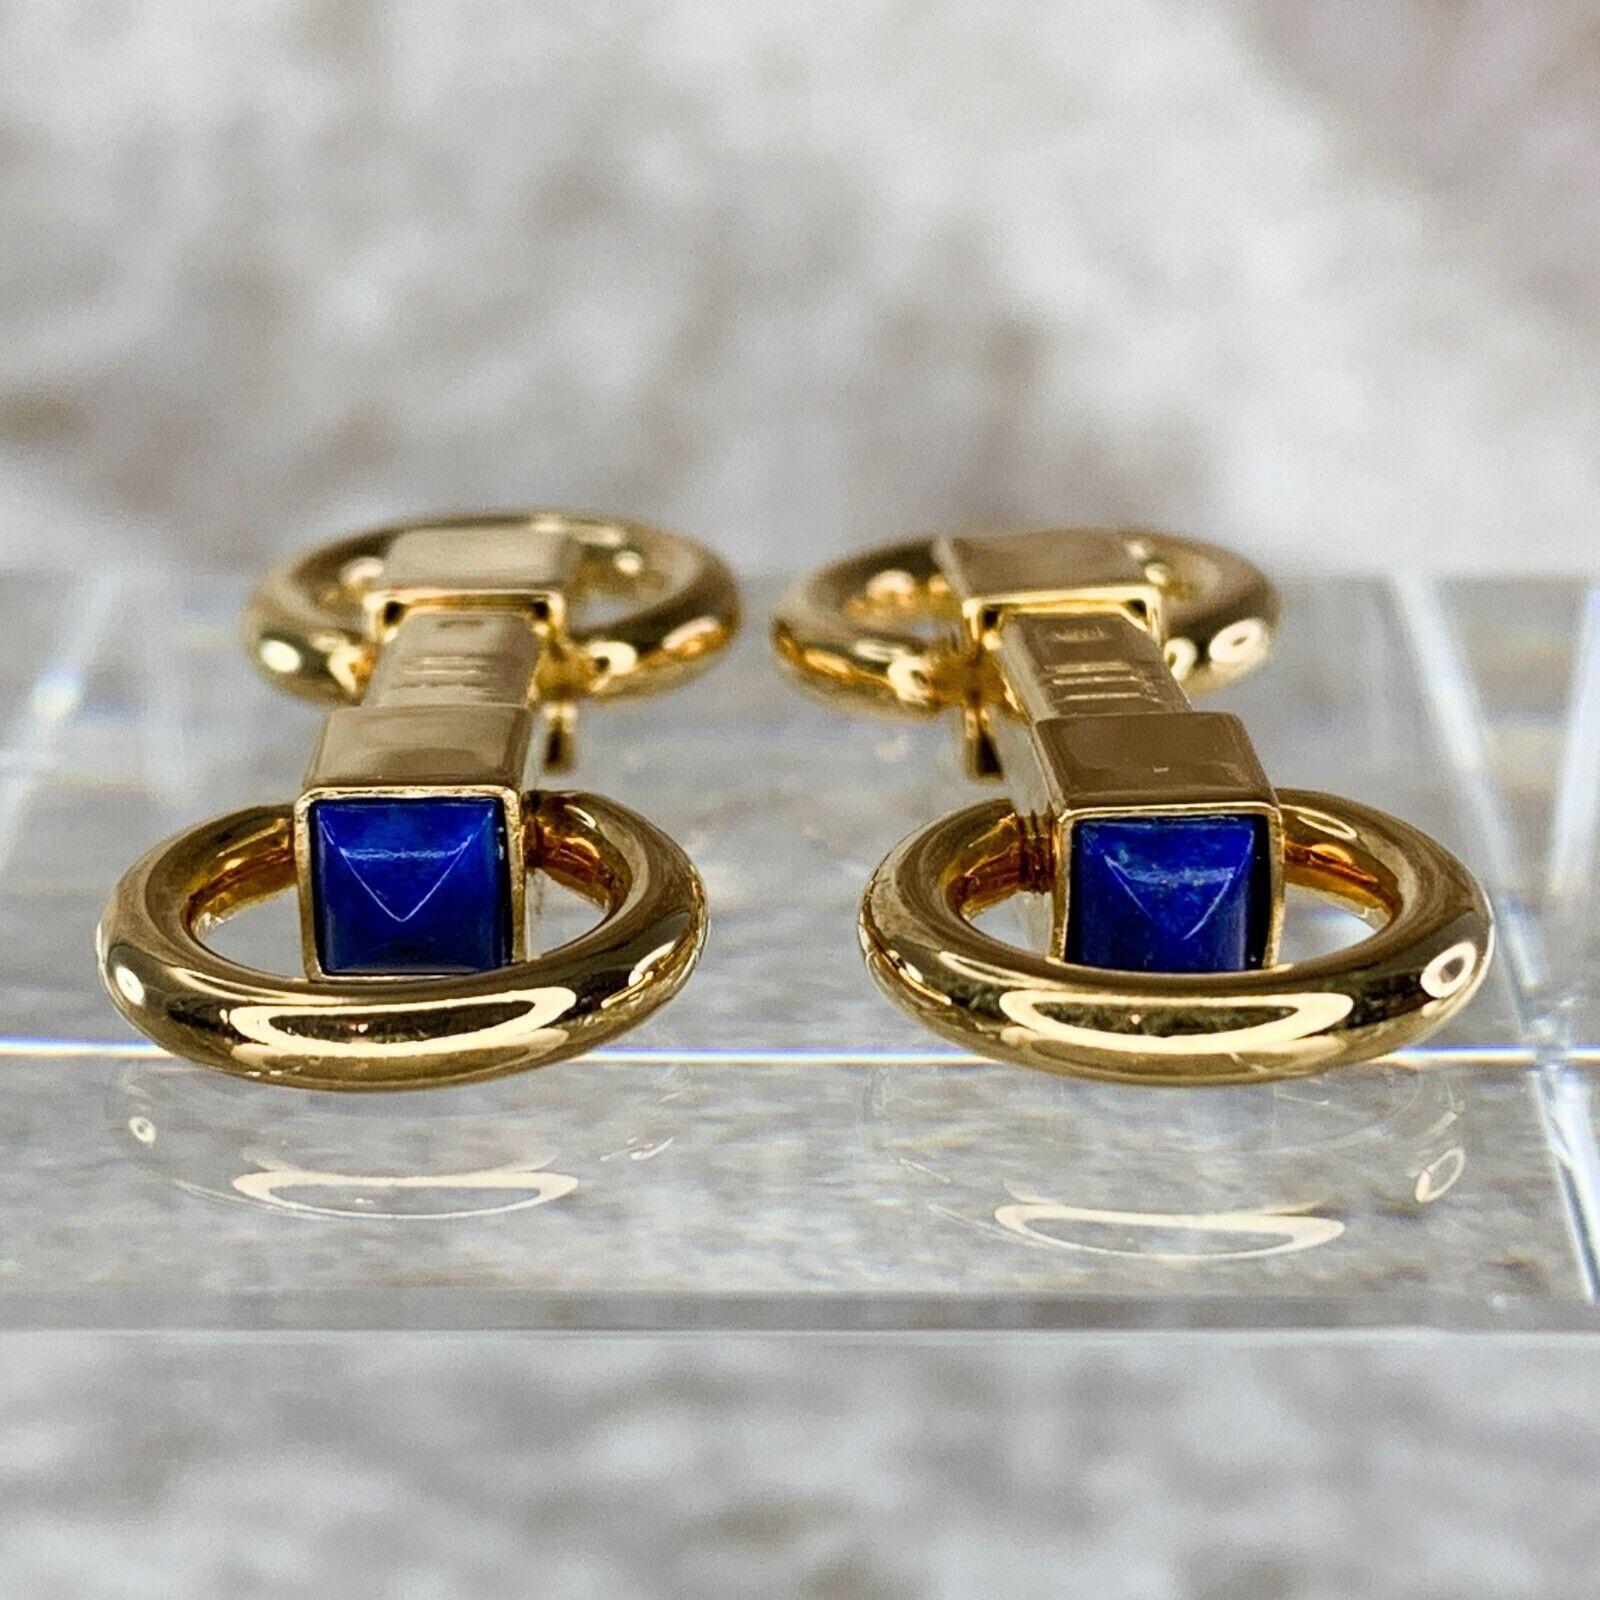 Cabochon Vintage Dunhill Cufflinks Gold Plated Blue Lapis Lazuli, Circa 2000 For Sale